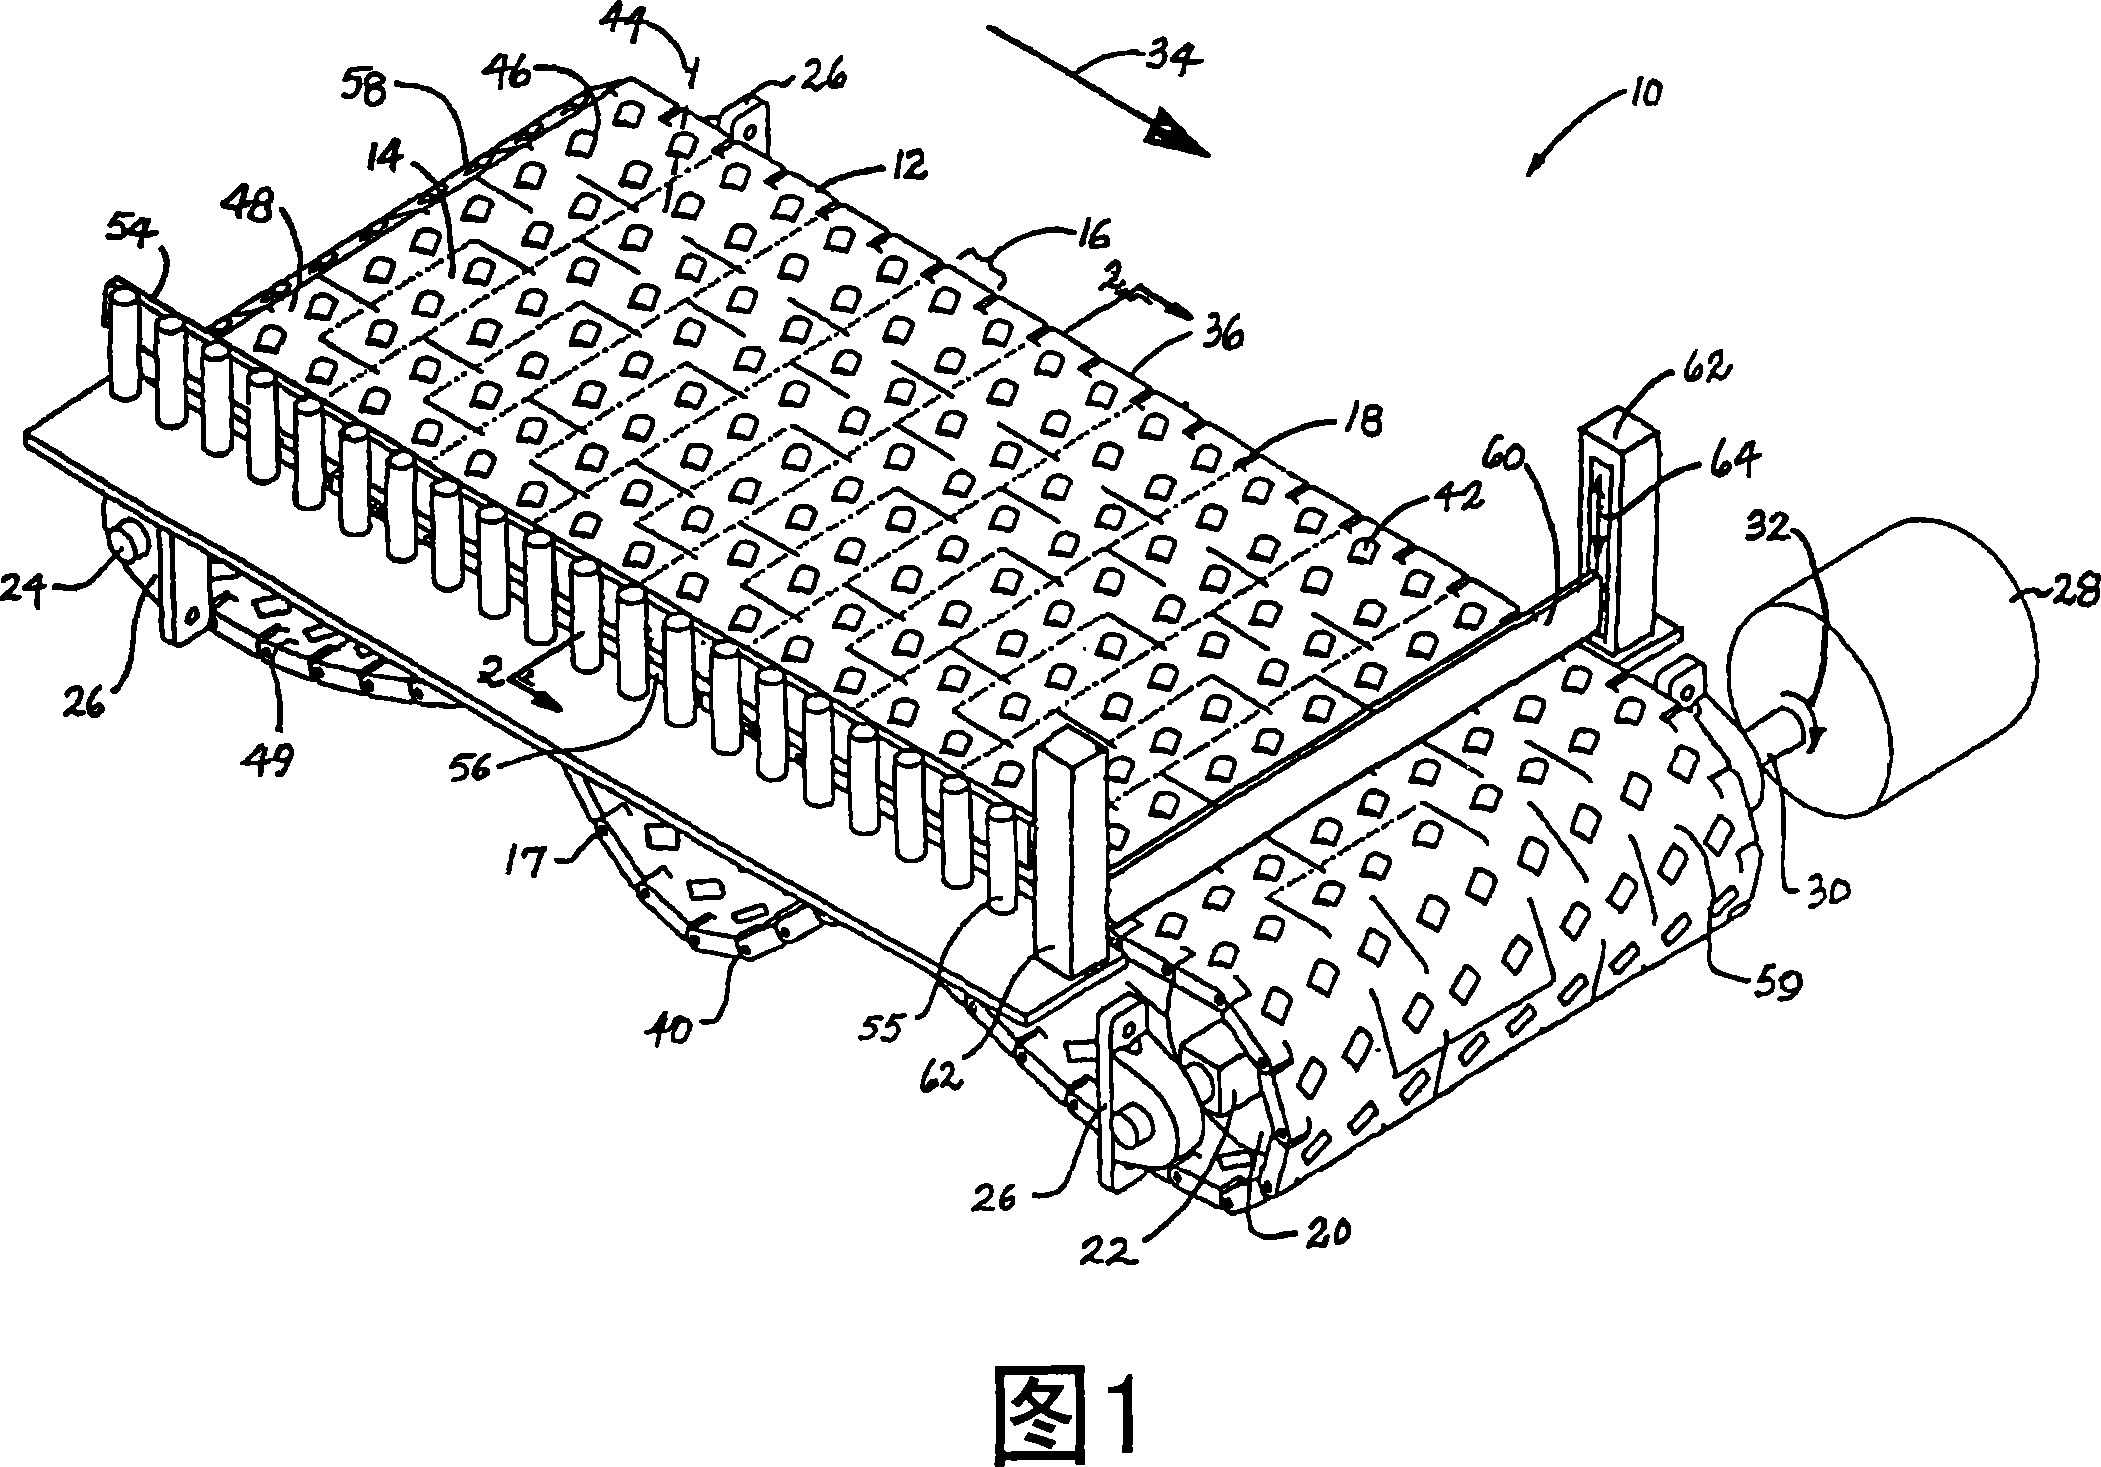 Roller-belt conveyor for accumulating and moving articles laterally across the conveyor